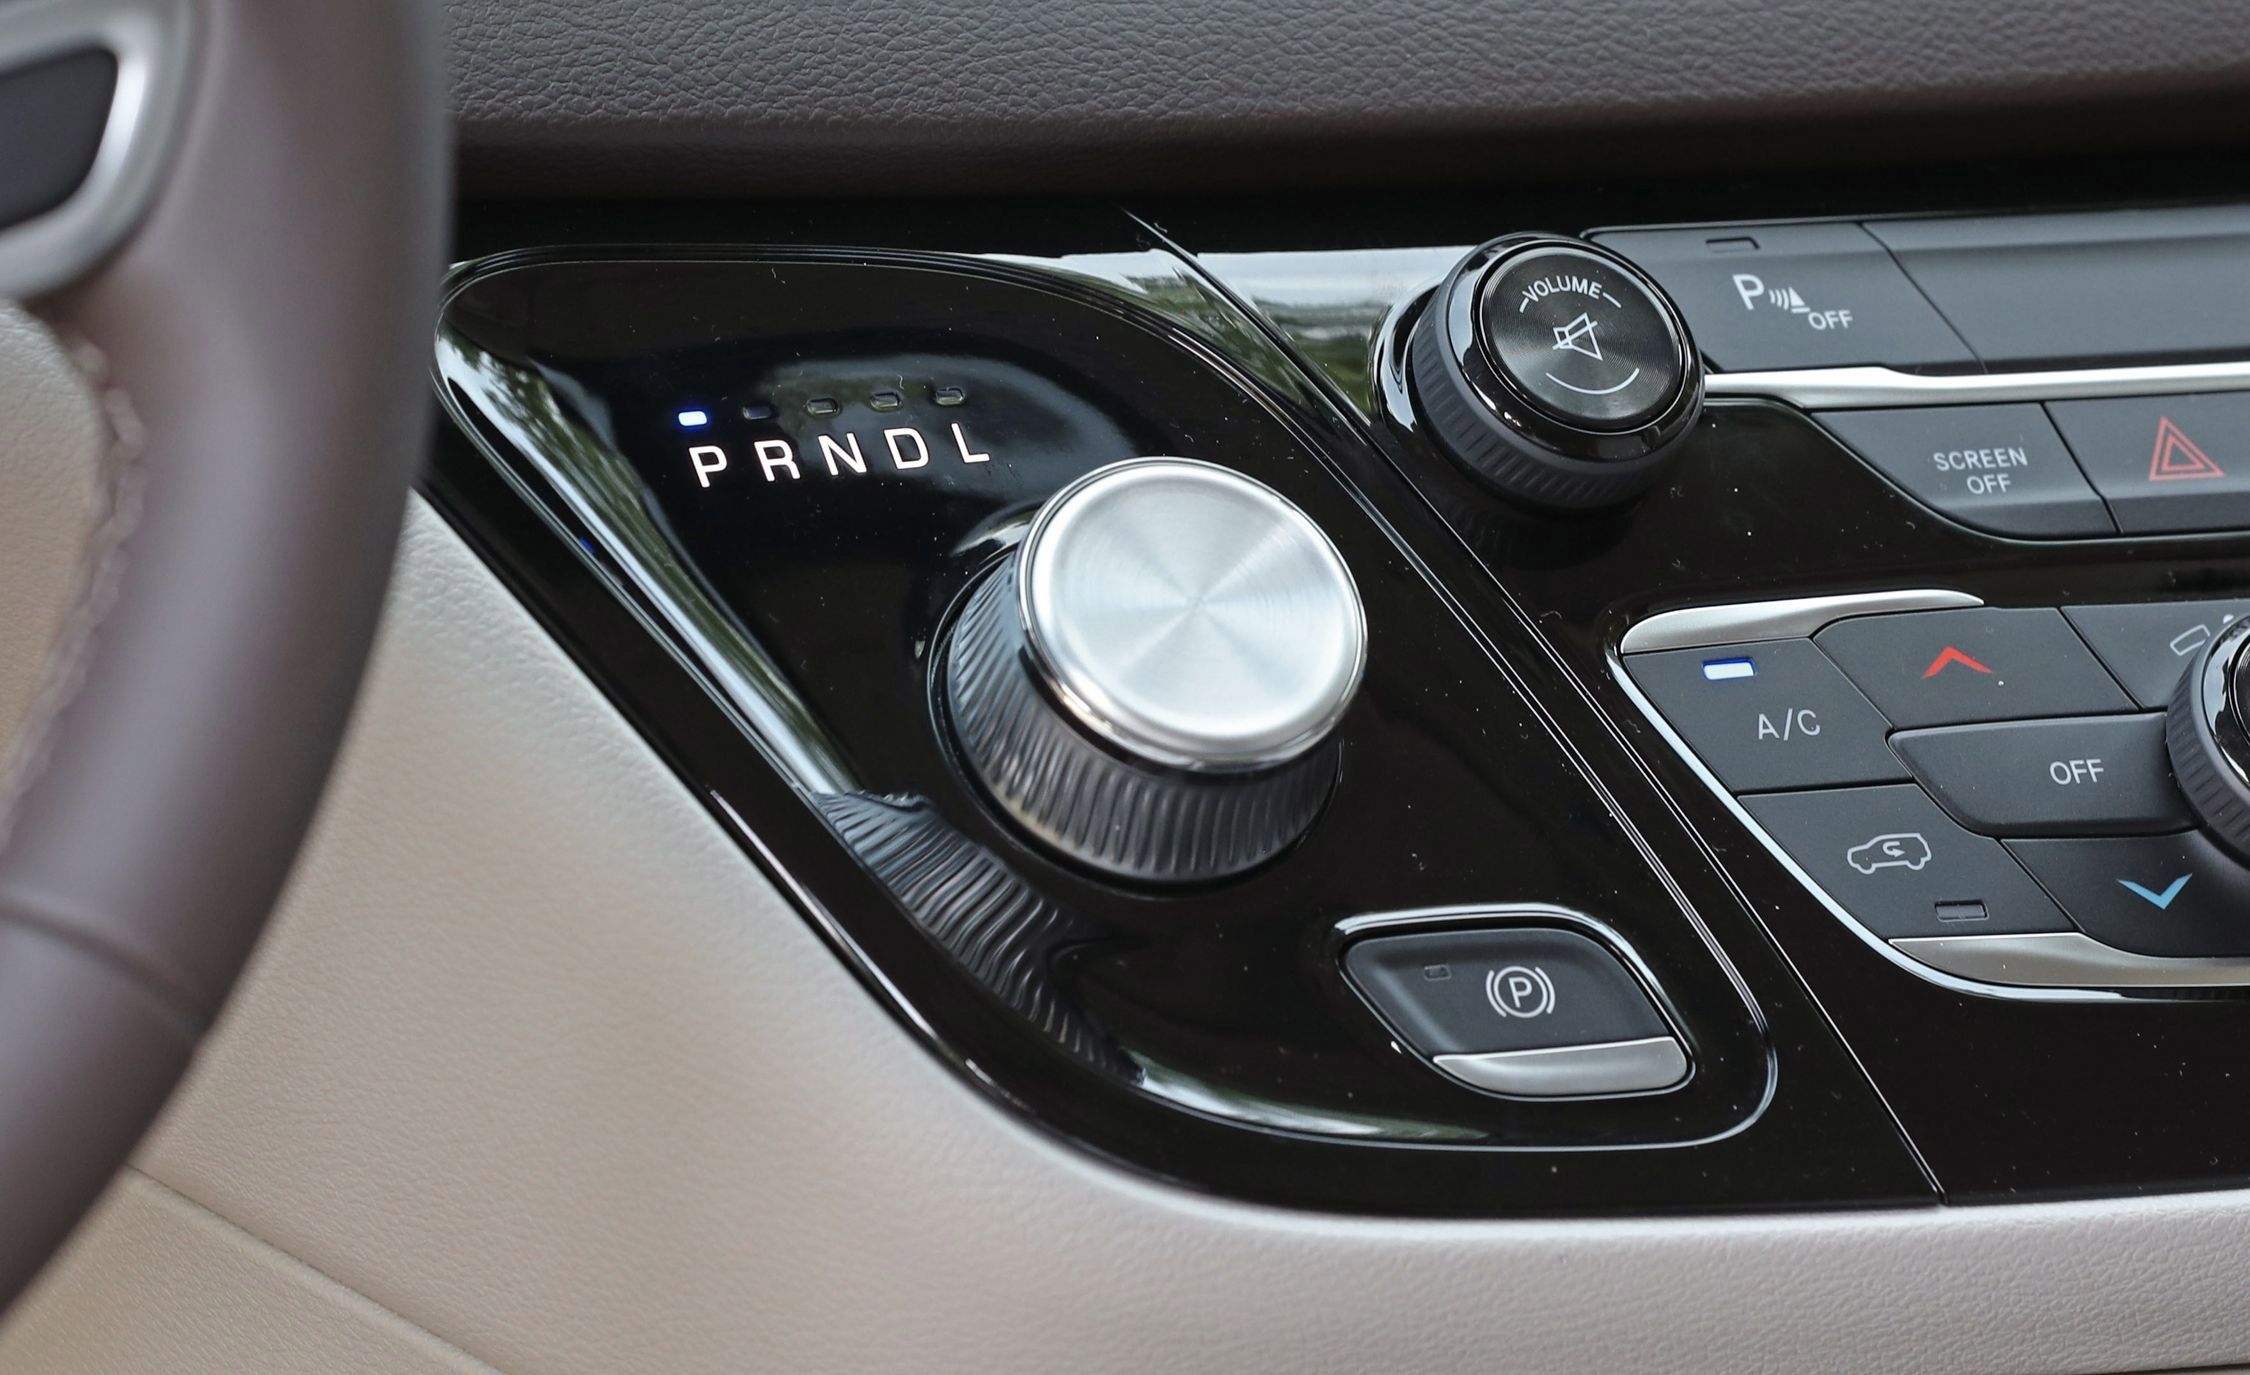 Why Are So Many New Cars' Gear Selectors Stupid?